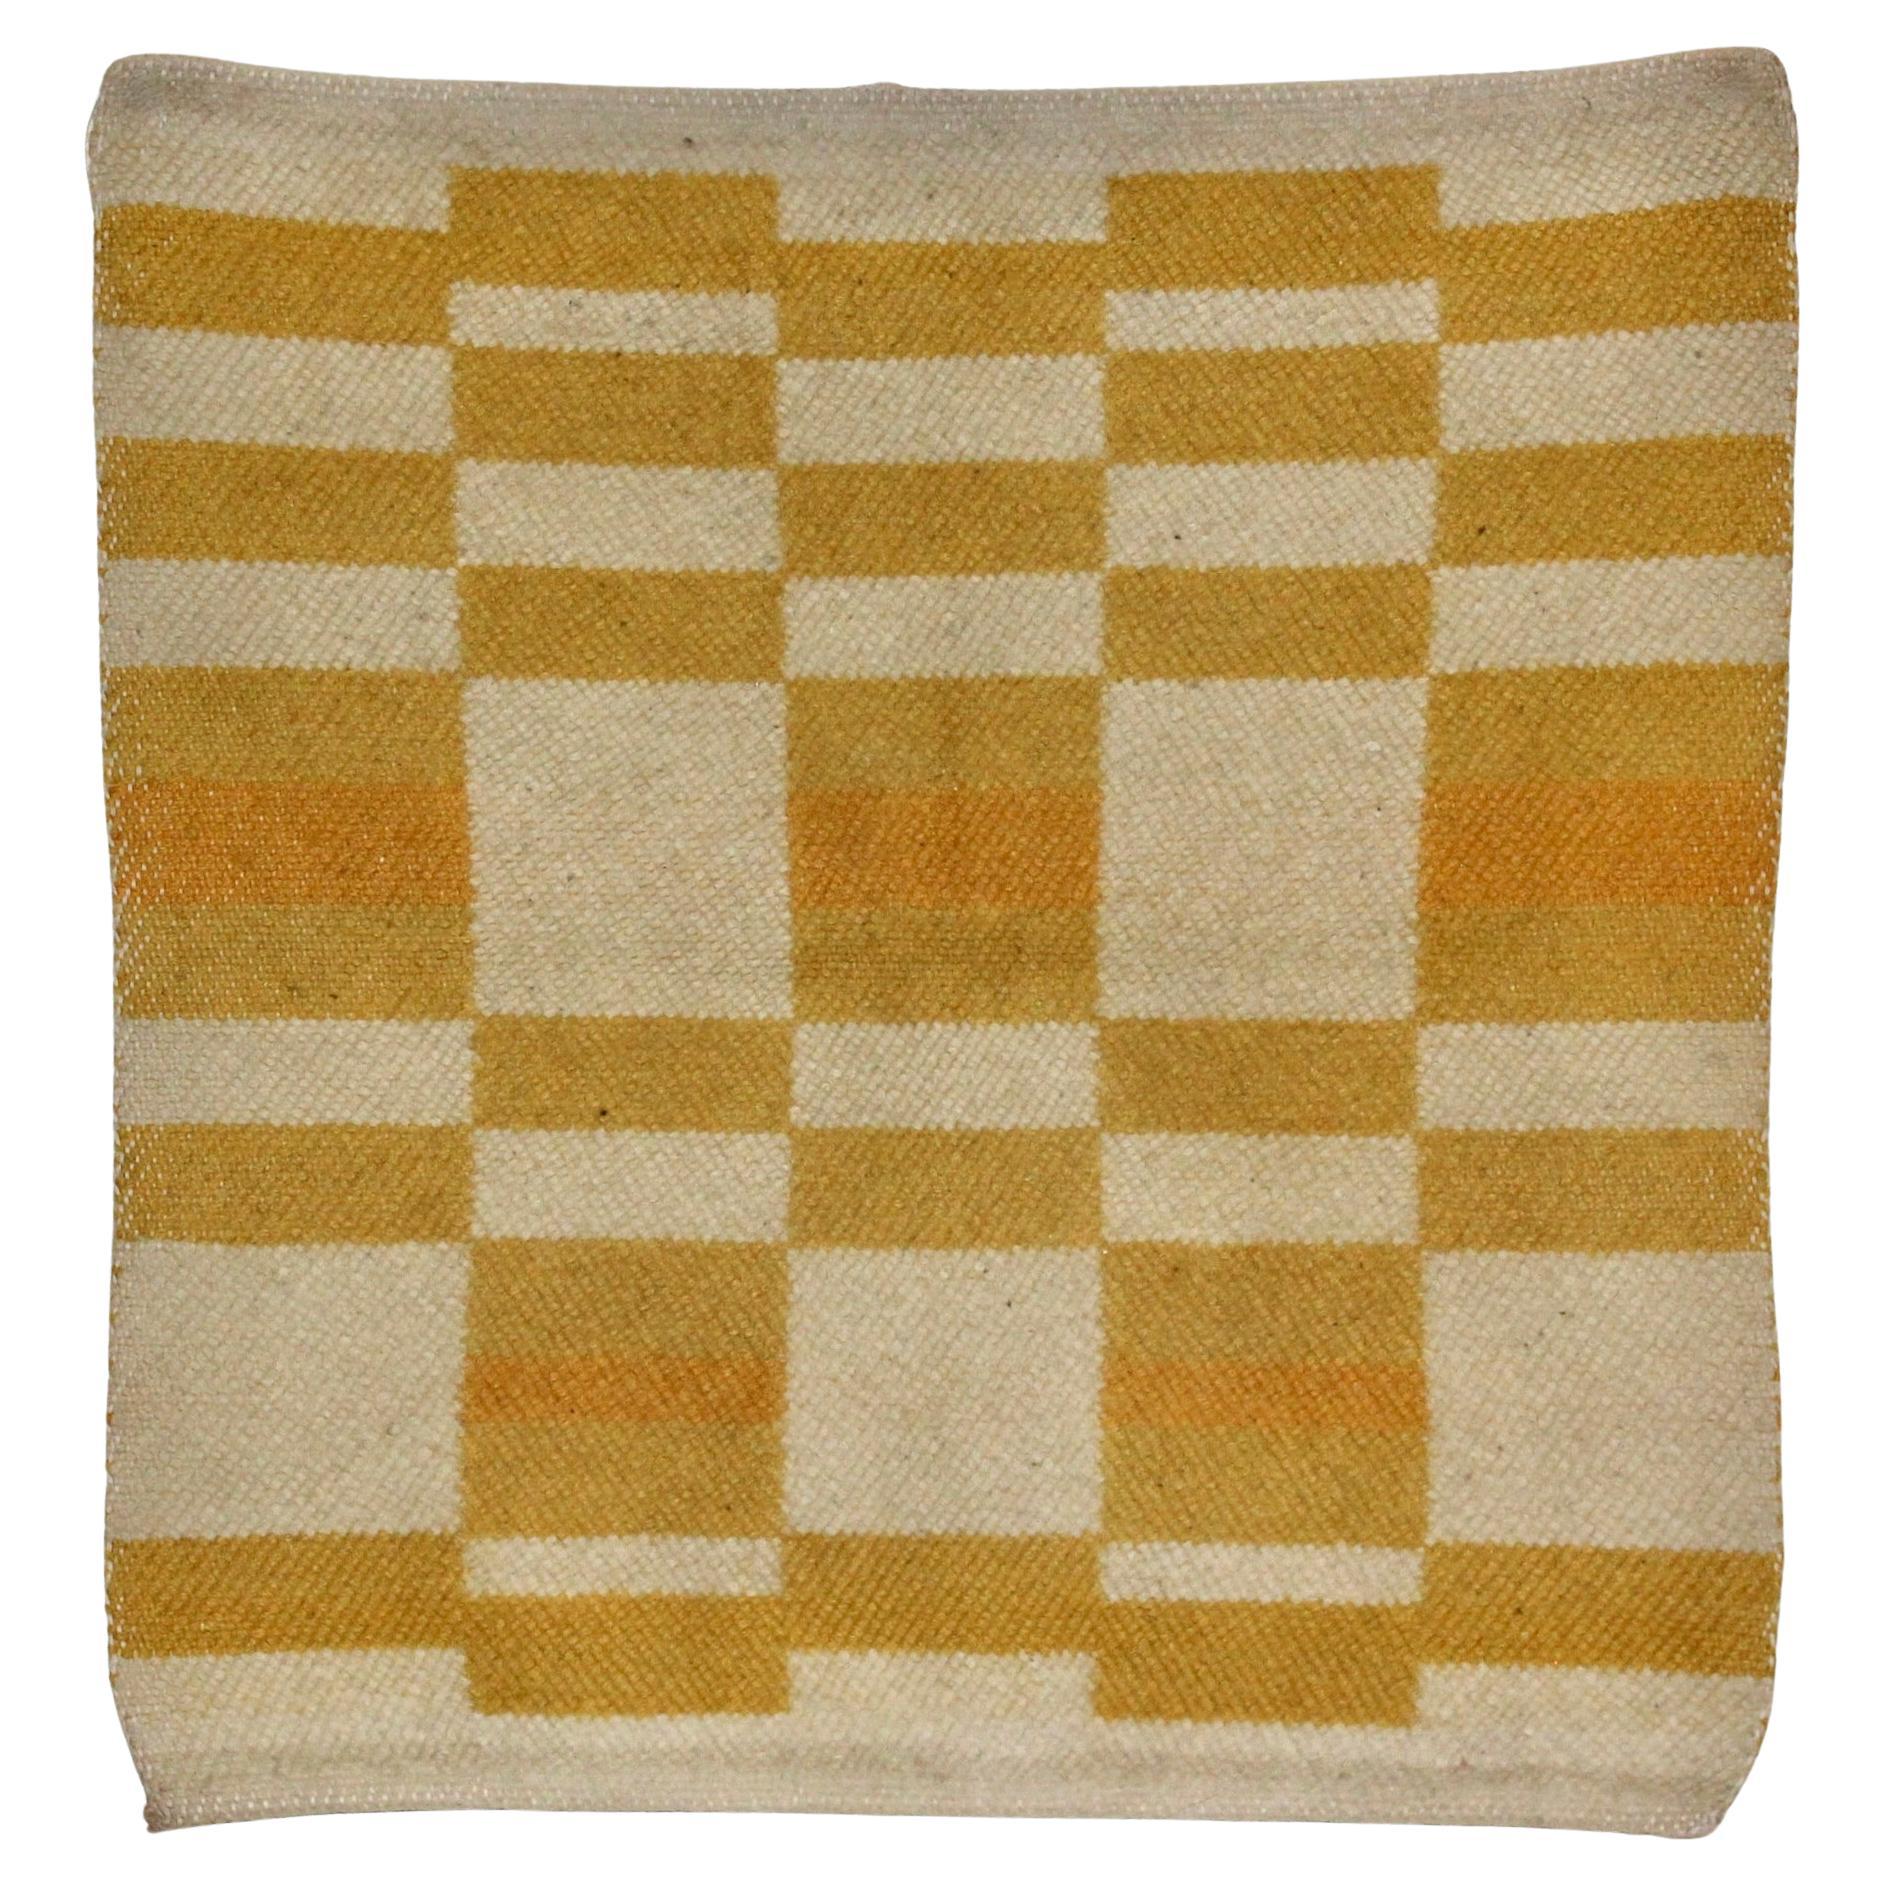 Important Anni Albers style Bauhaus or Black Mountain Period Hand Weaving